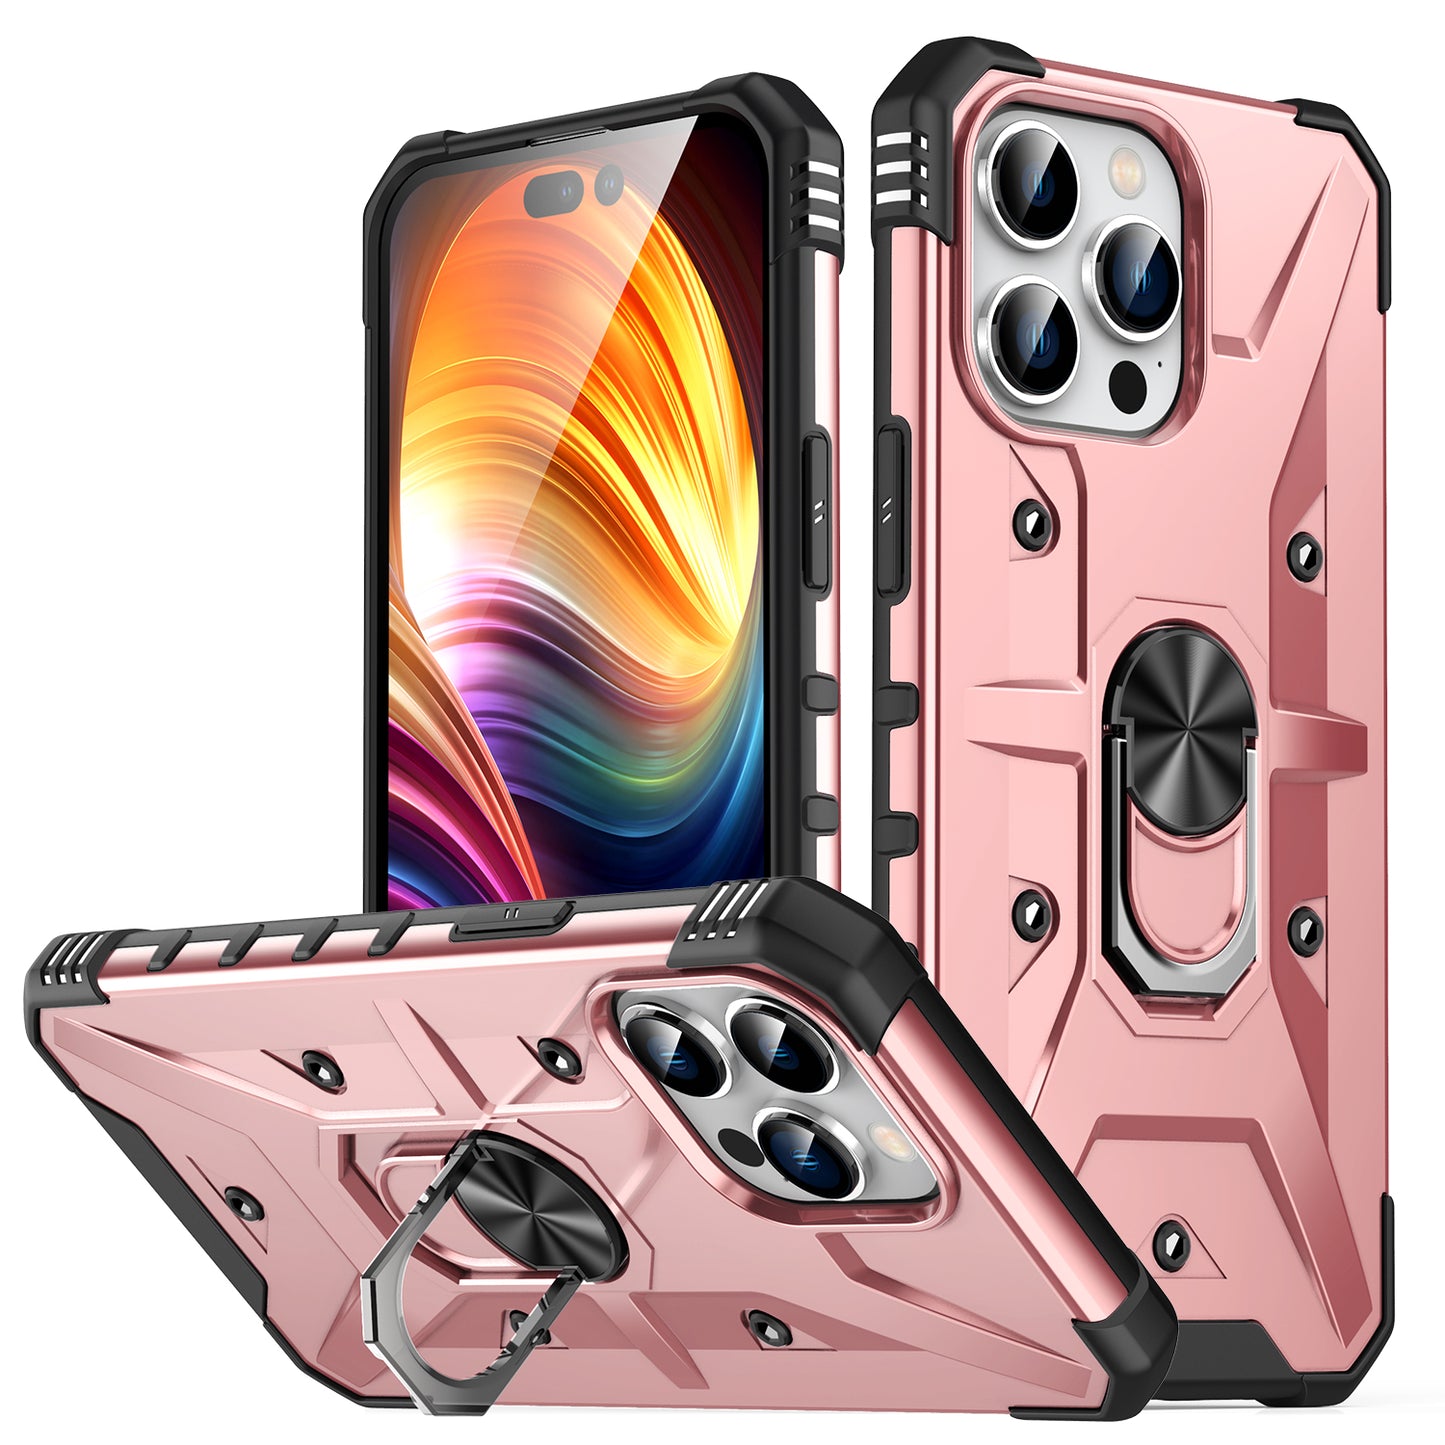 kickstand mobile phone accessories back cover with camera ring holder shockproof armor phone case for iphone 11 pro max